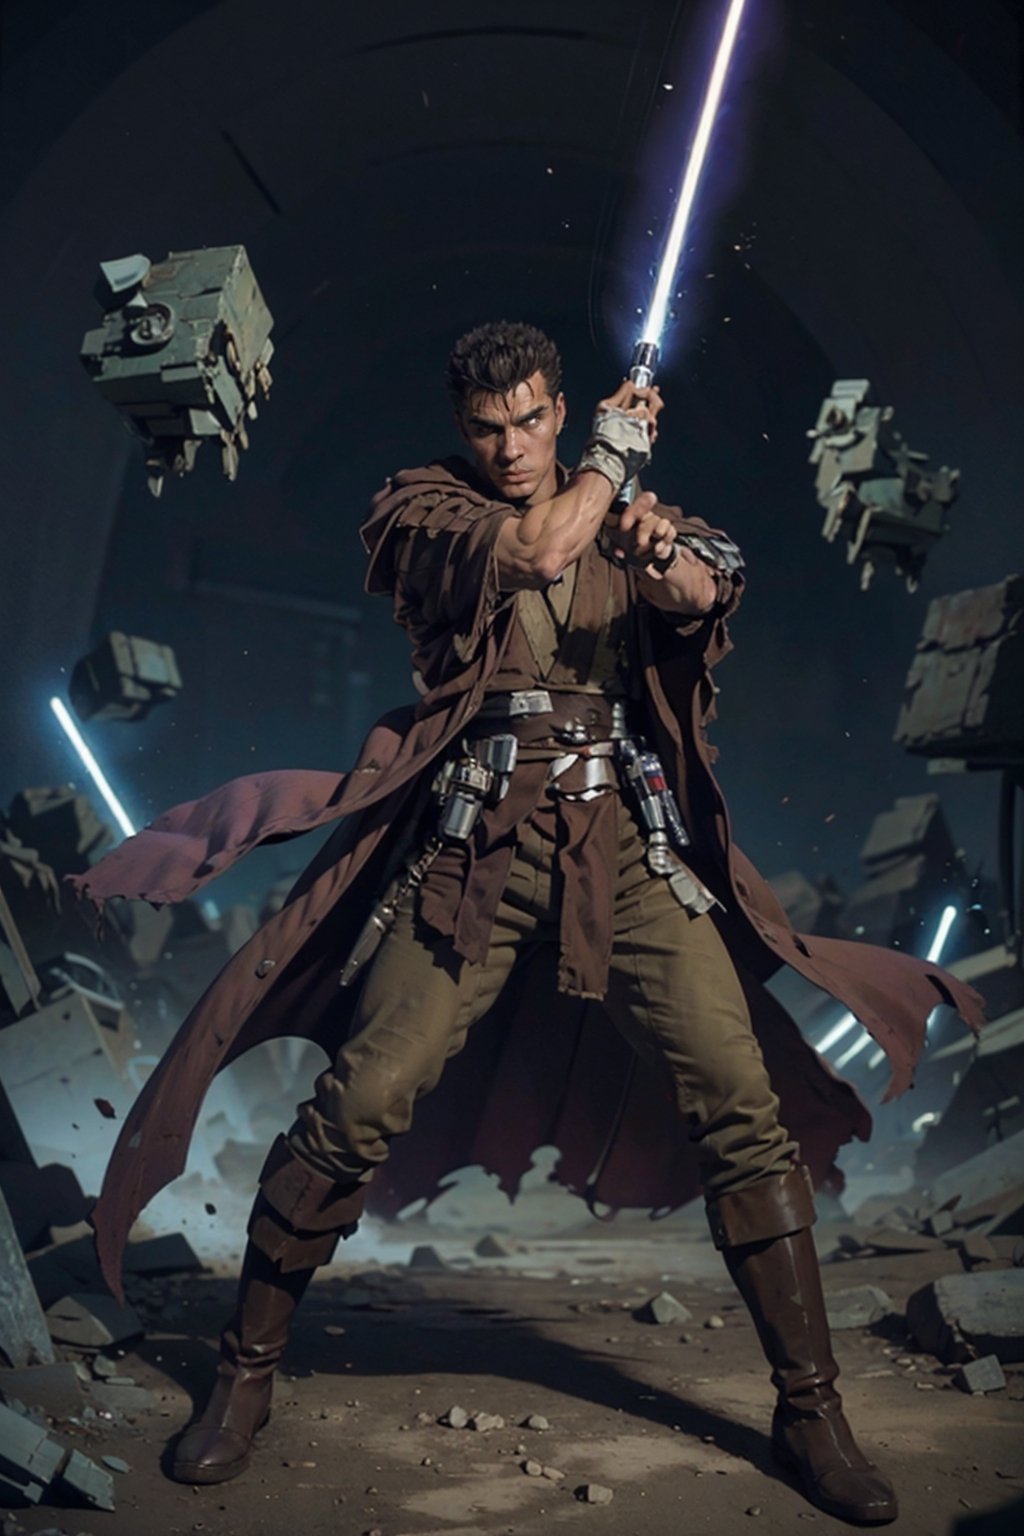 1 man, image of a mature man who looks like "Guts" from Berserk in jedi robes holding a purple lightsaber, mature, 35 years old, dynamic pose, ready for battle, Jedi, Master, Male_Warrior, Male Knight, Torn_Cloak, Torn Clothes, Fight_Traces, in jedioutfit,torn clothes,light_saber,black dress,cloth pieces,purple lightsaber